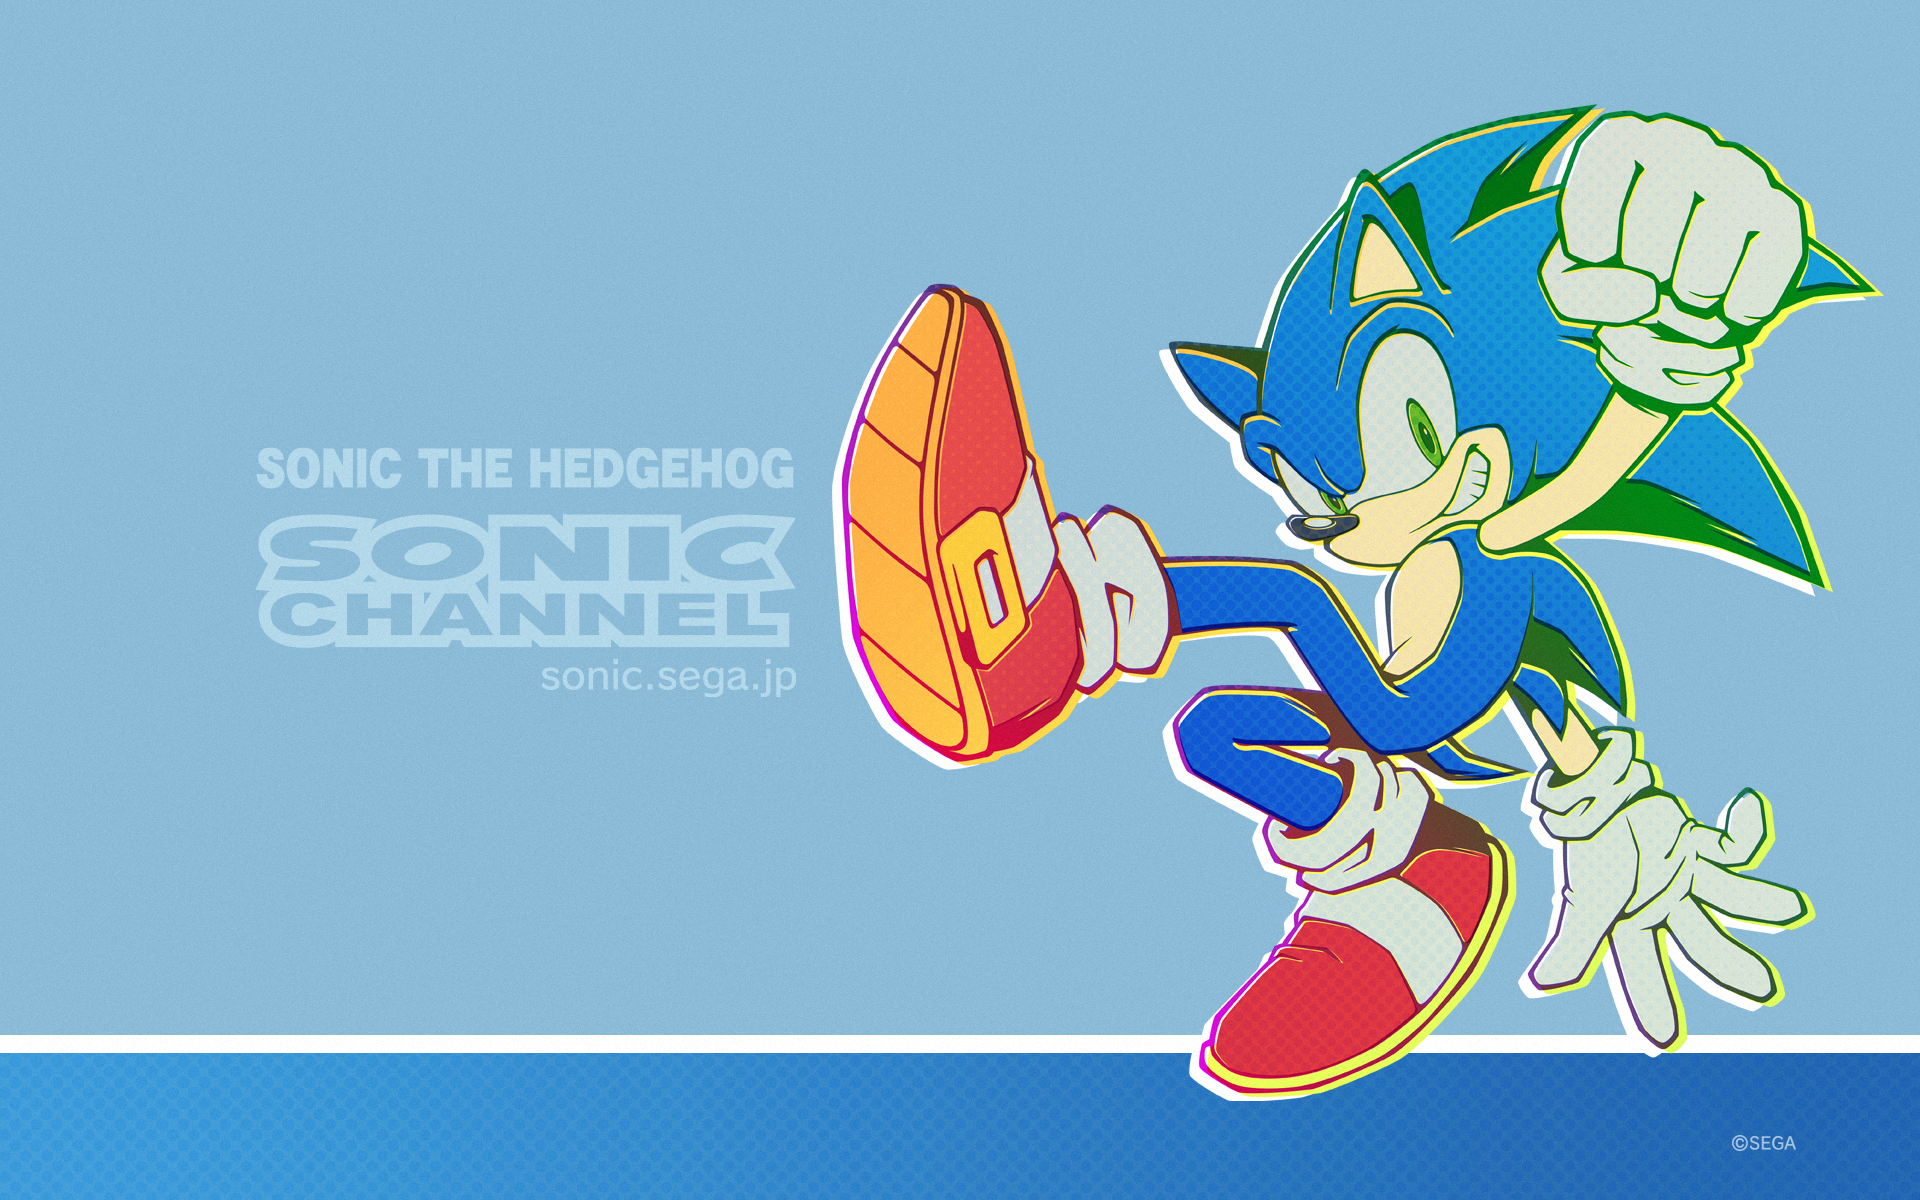 Happy Birthday Sonic! Sonic Channel's June Artwork Features Blue